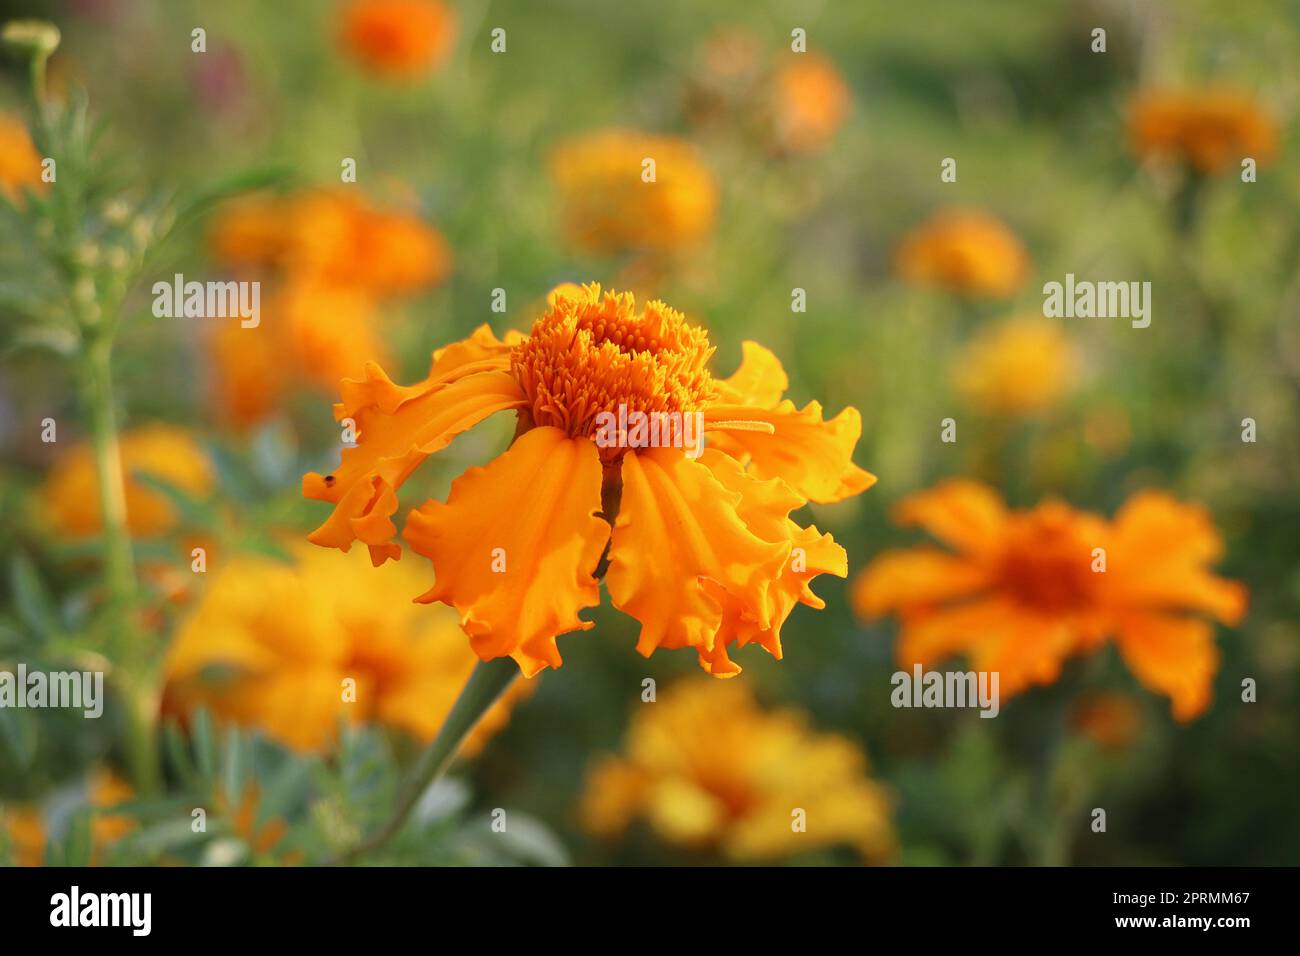 Marigold flowers. Tagetes flowers in the meadow in the sunlight. Yellow and orange marigold flowers in the garden Stock Photo